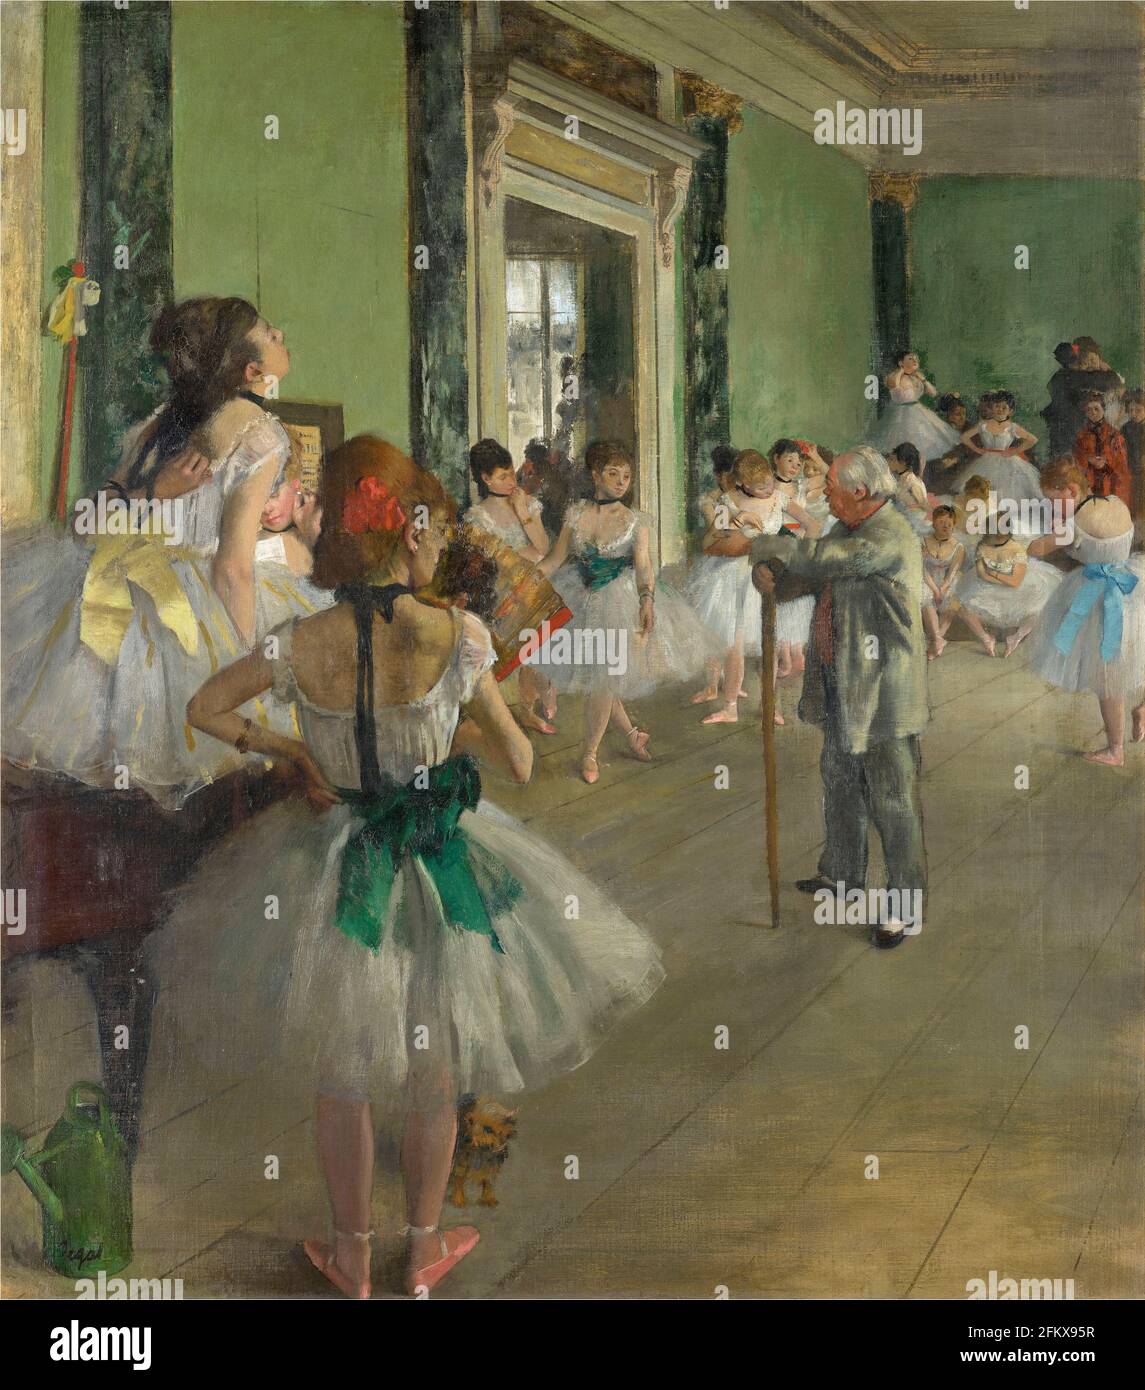 Title: The Dancing Class Creator:  Edgar Degas Date: c.1873-76 Medium: Oil on canvas Dimensions: 85x75 cms Location: Musee d'Orsay, Paris, France Stock Photo